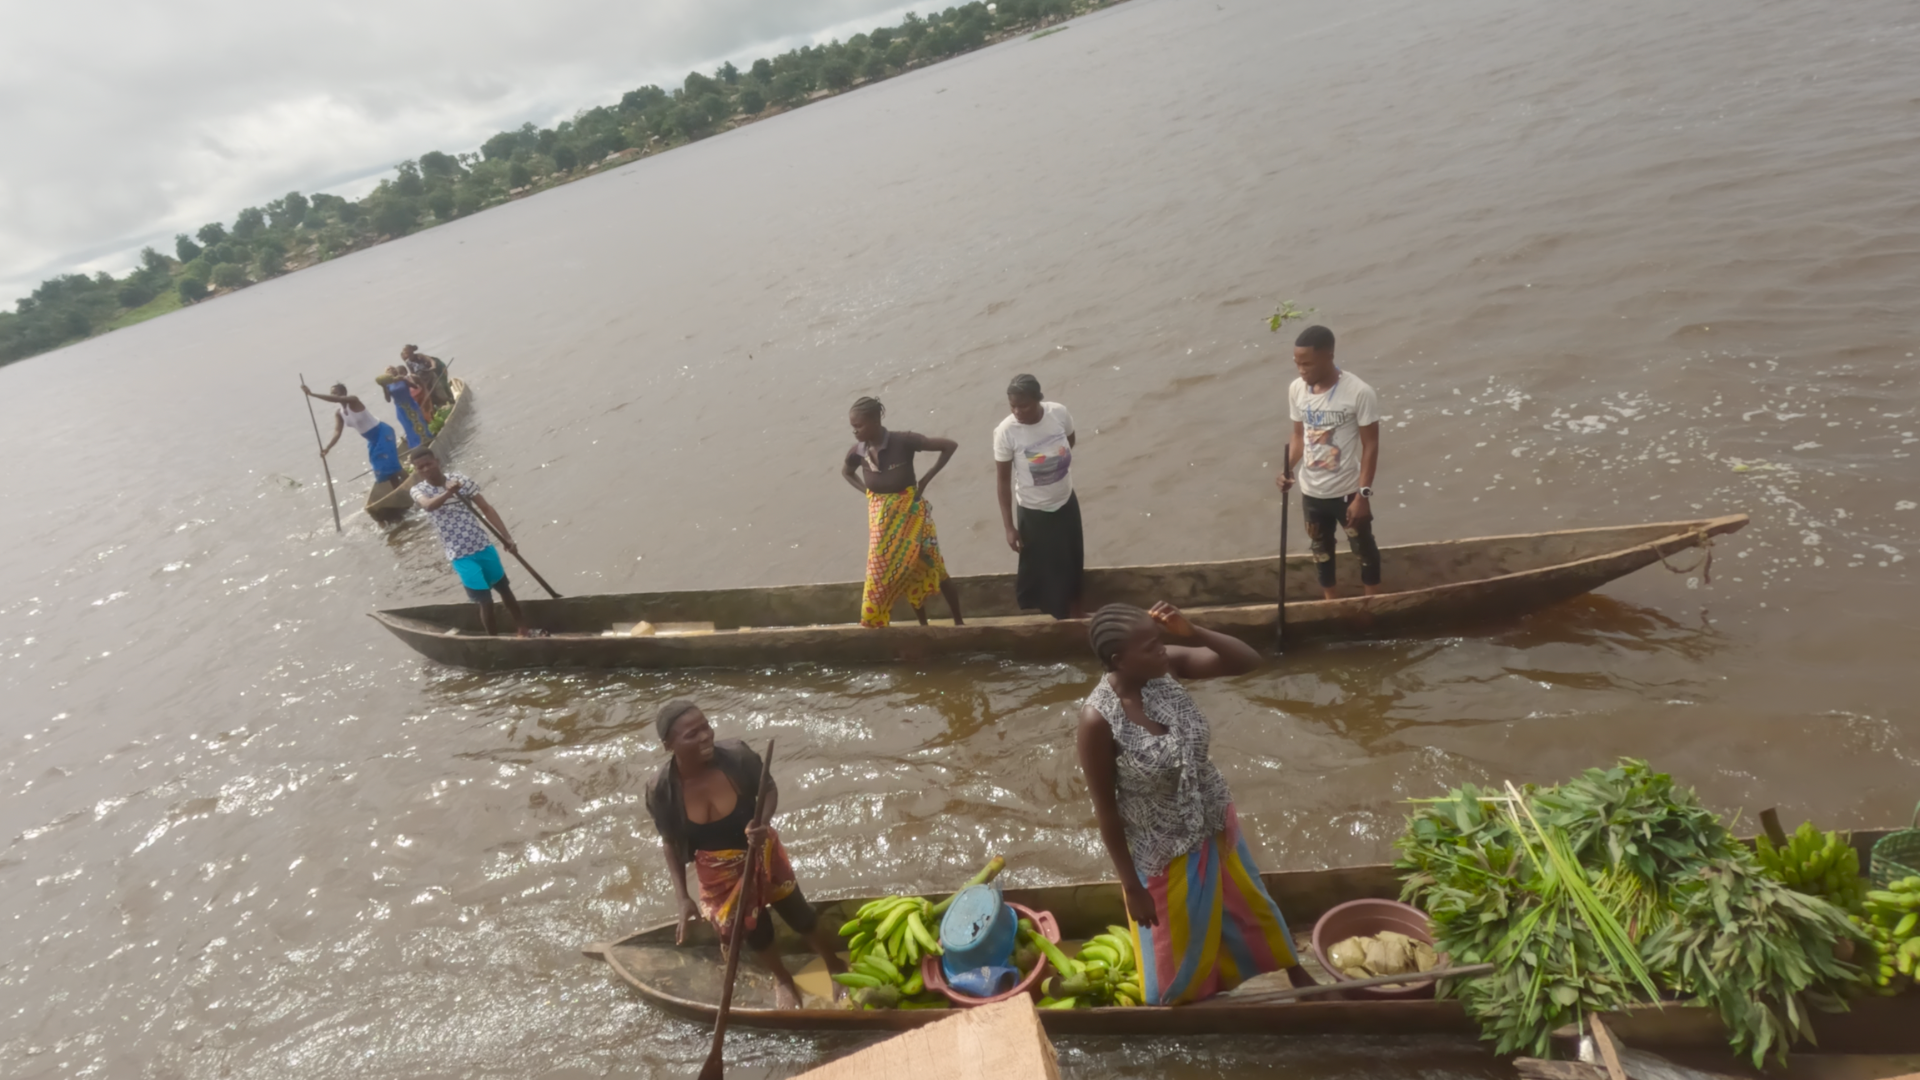 villagers coming to our boat to sell vegetables and manioc